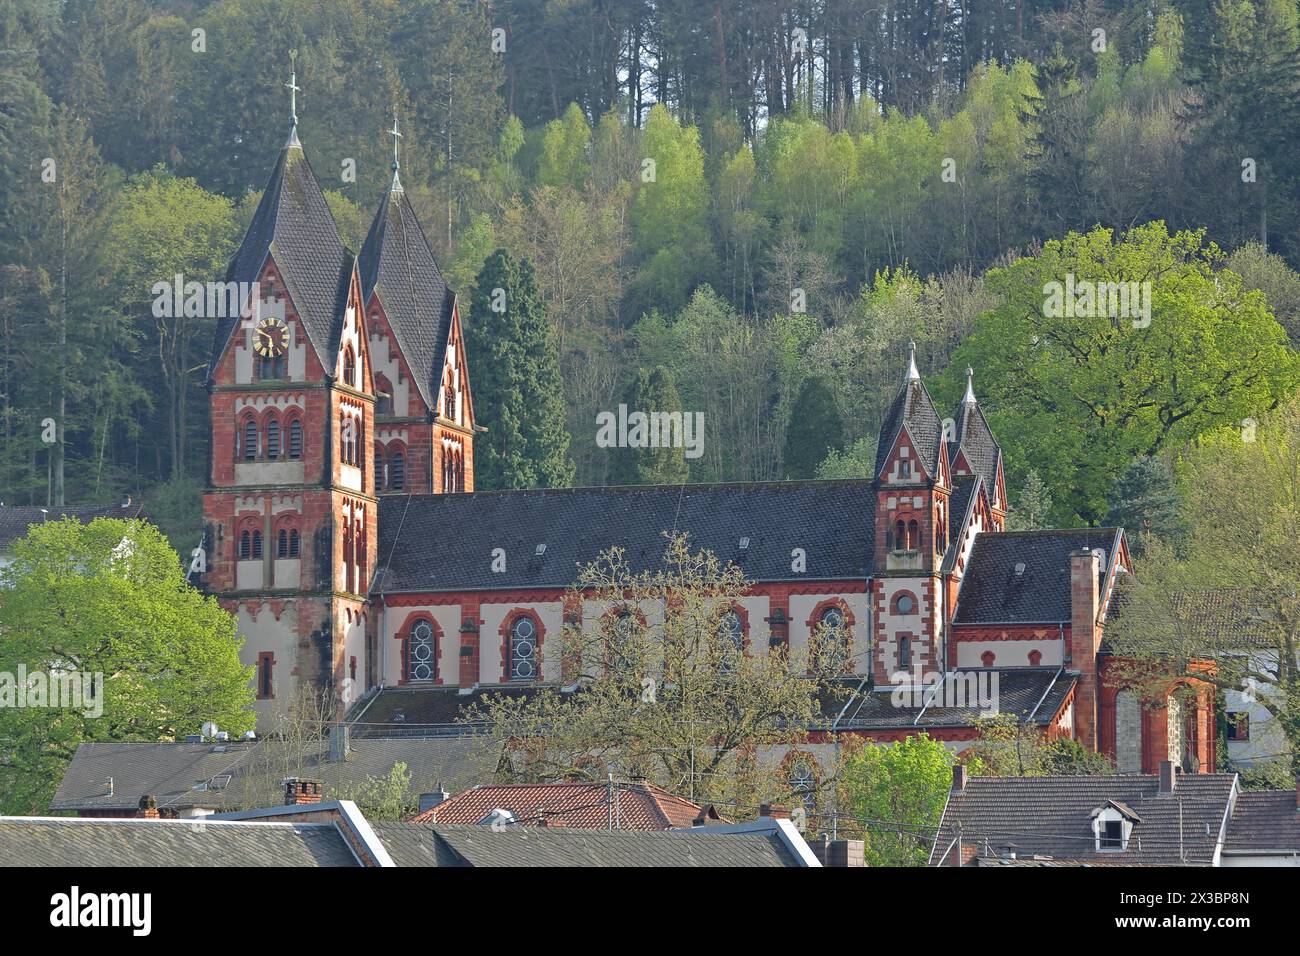 Neo-Romanesque St Lutwinus Church with twin towers, Mettlach, Saarland, Germany Stock Photo